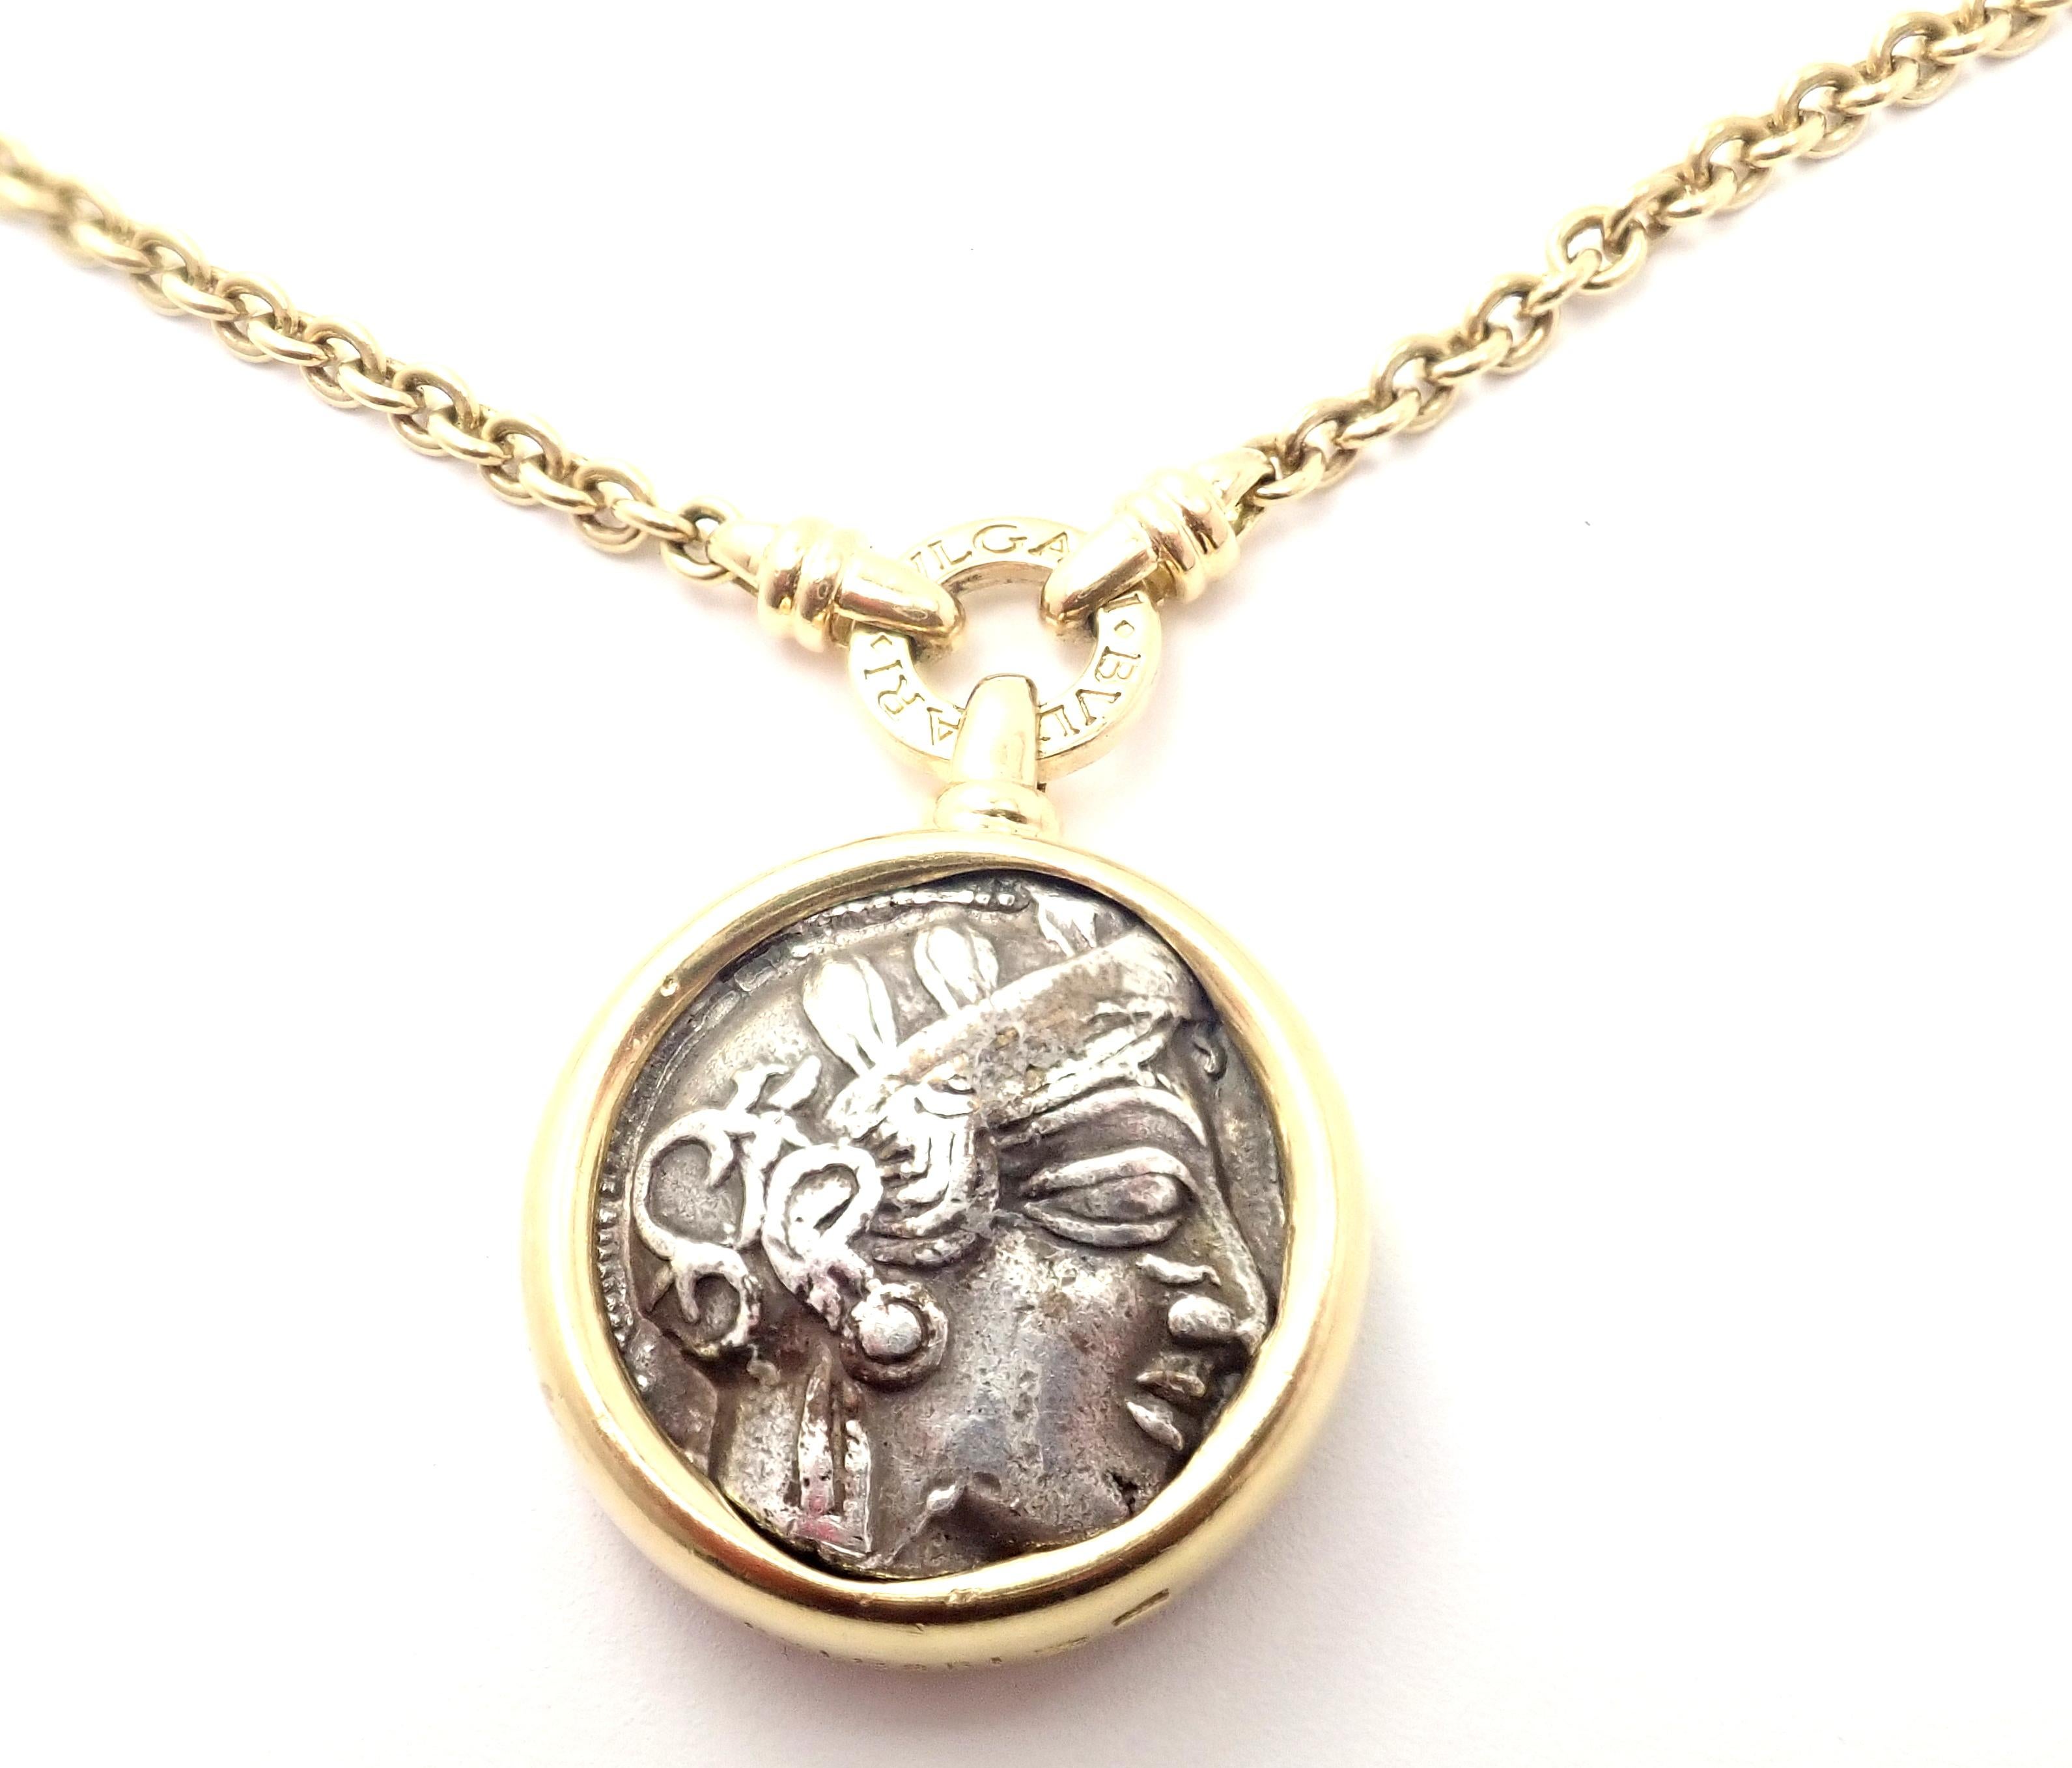 18k Yellow Gold Ancient Greek Coin Link Necklace by Bulgari. 
This necklace comes with an original Bulgari box. 
With 1 Ancient Coin Attica - Atene 449-404 b.c.
Details: 
Necklace is 36